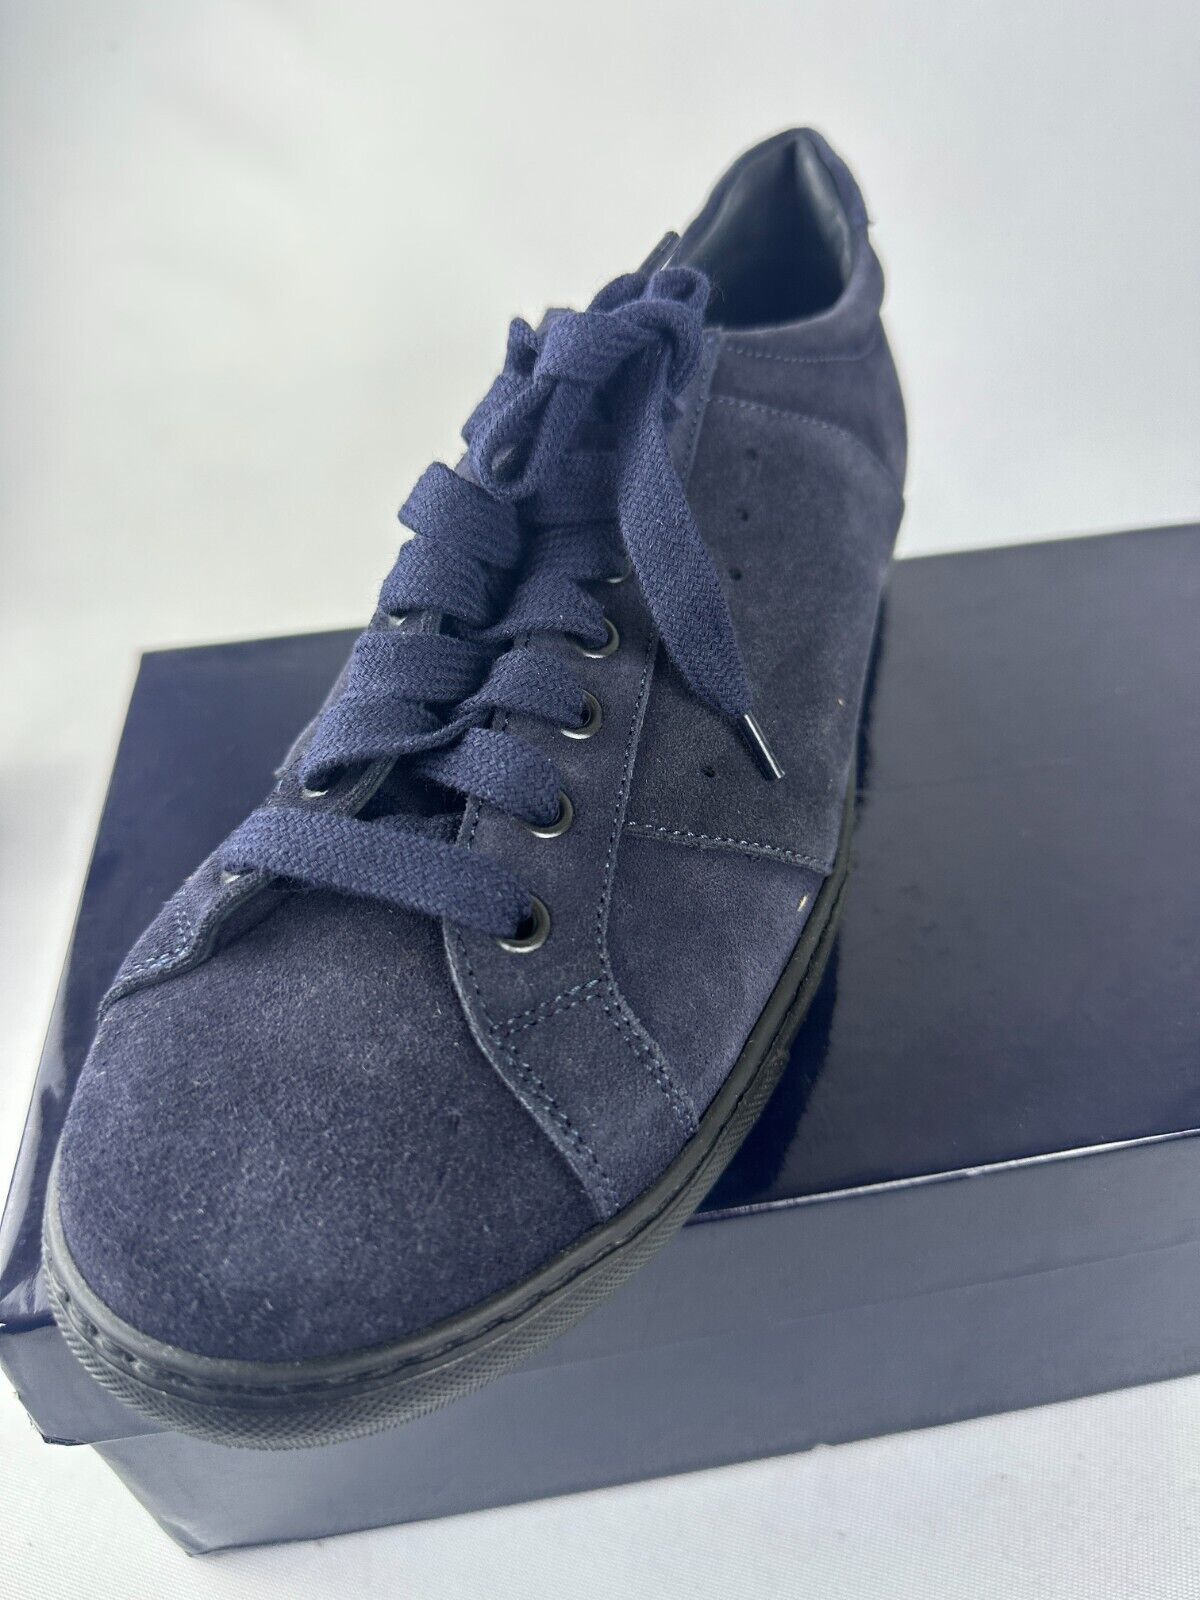 Michael Pasinkoff Mens 42 Navy Blue Suede Sneaker Shoes Made in Italy